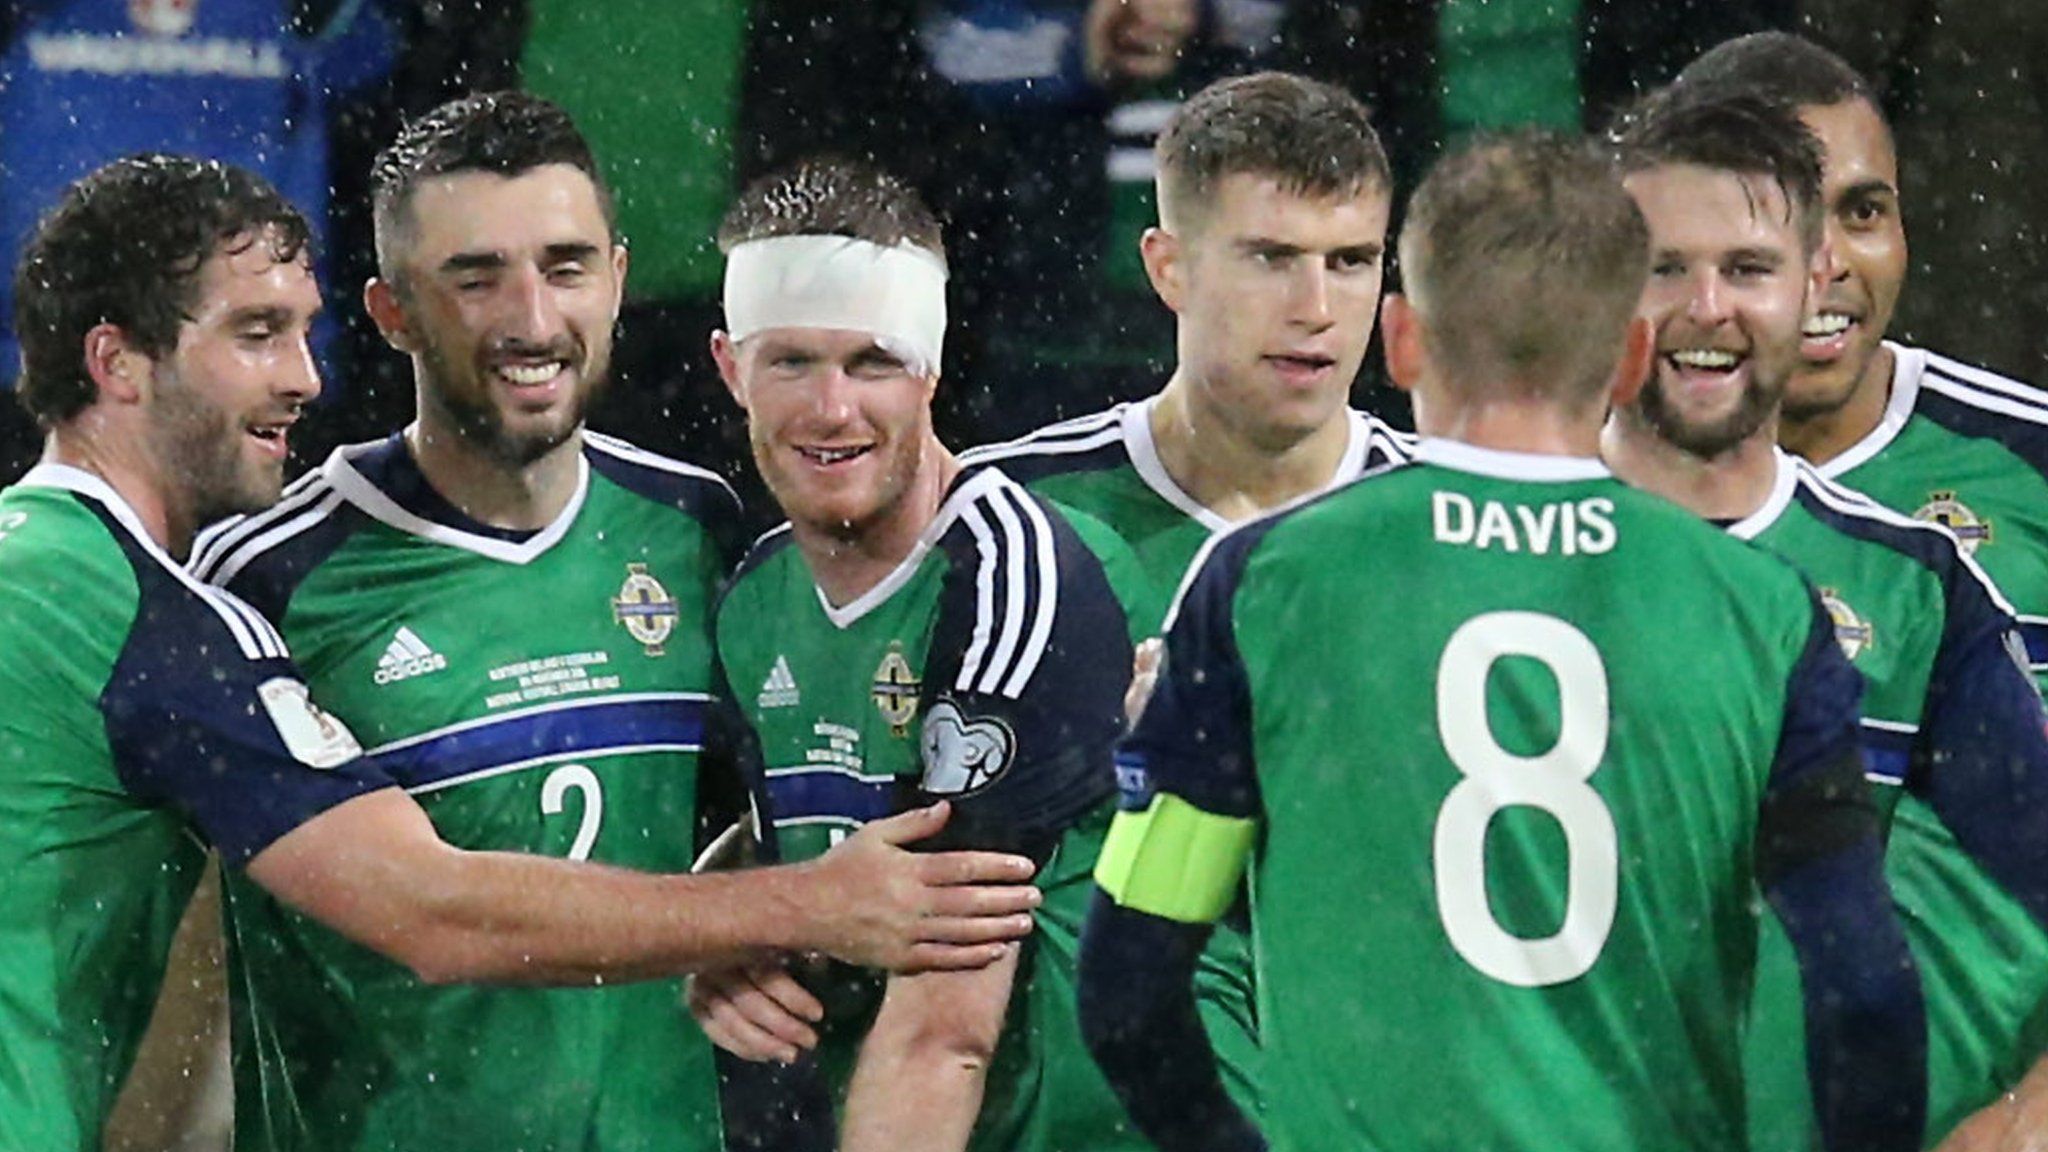 Chris Brunt's goal made it 4-0 for Northern Ireland against Azerbaijan